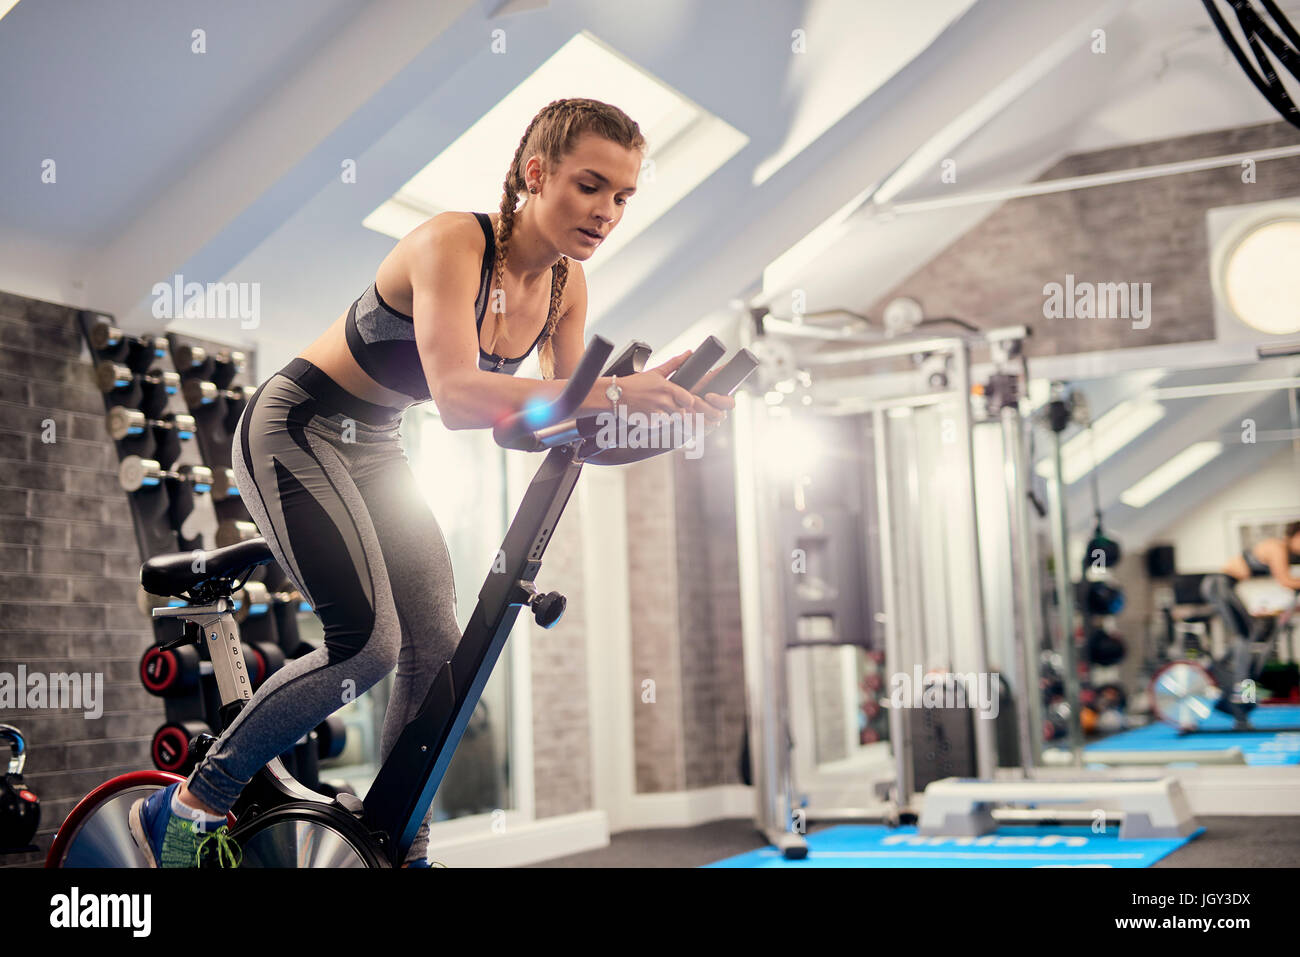 Young woman training, pedalling exercise bike in gym Stock Photo